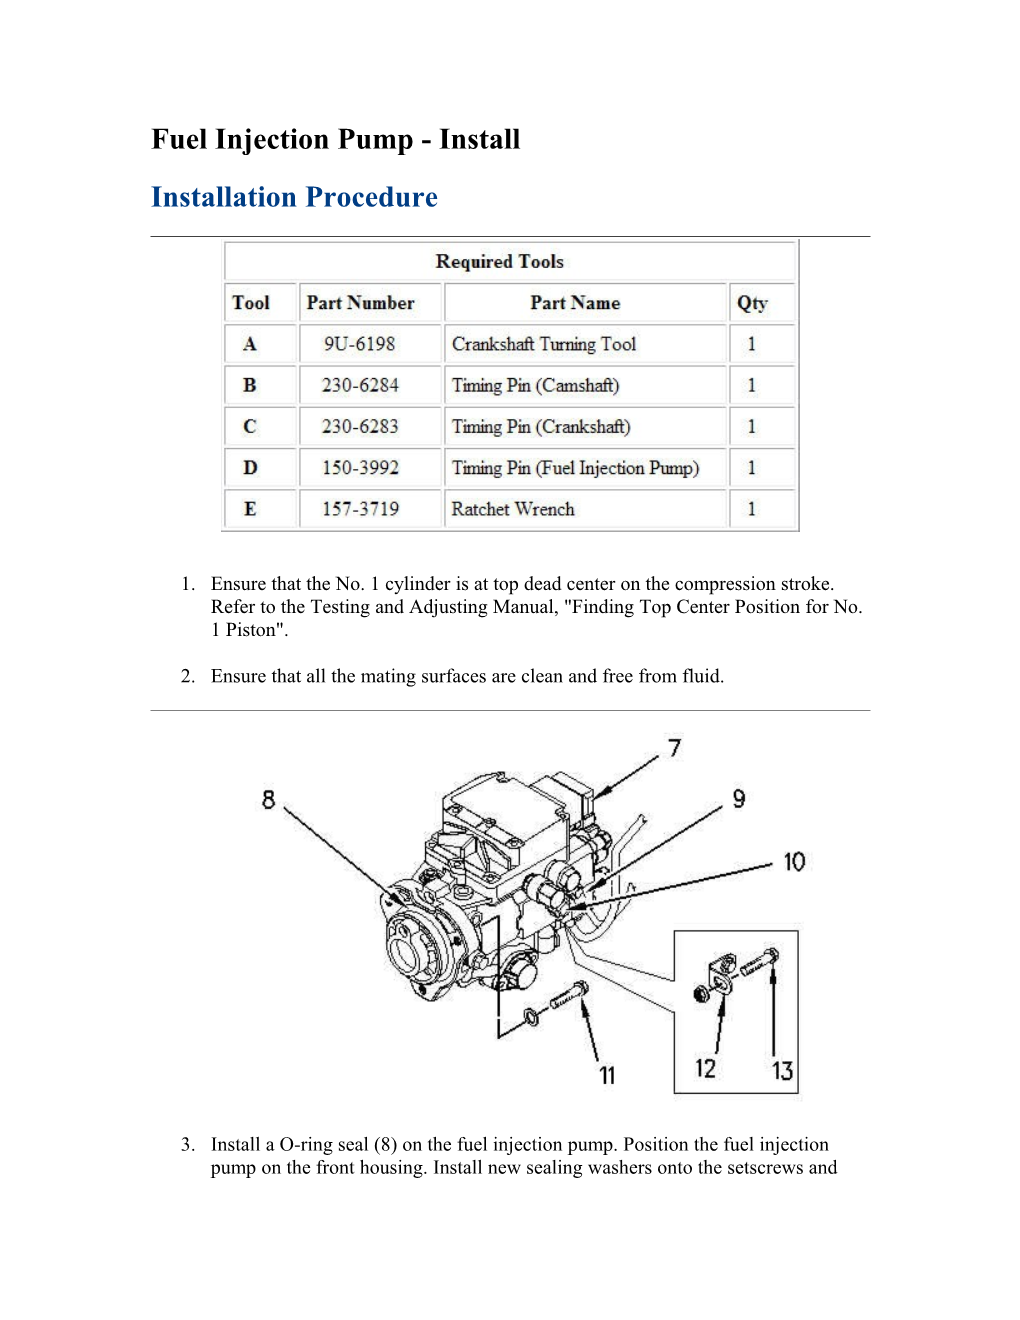 Fuel Injection Pump - Install